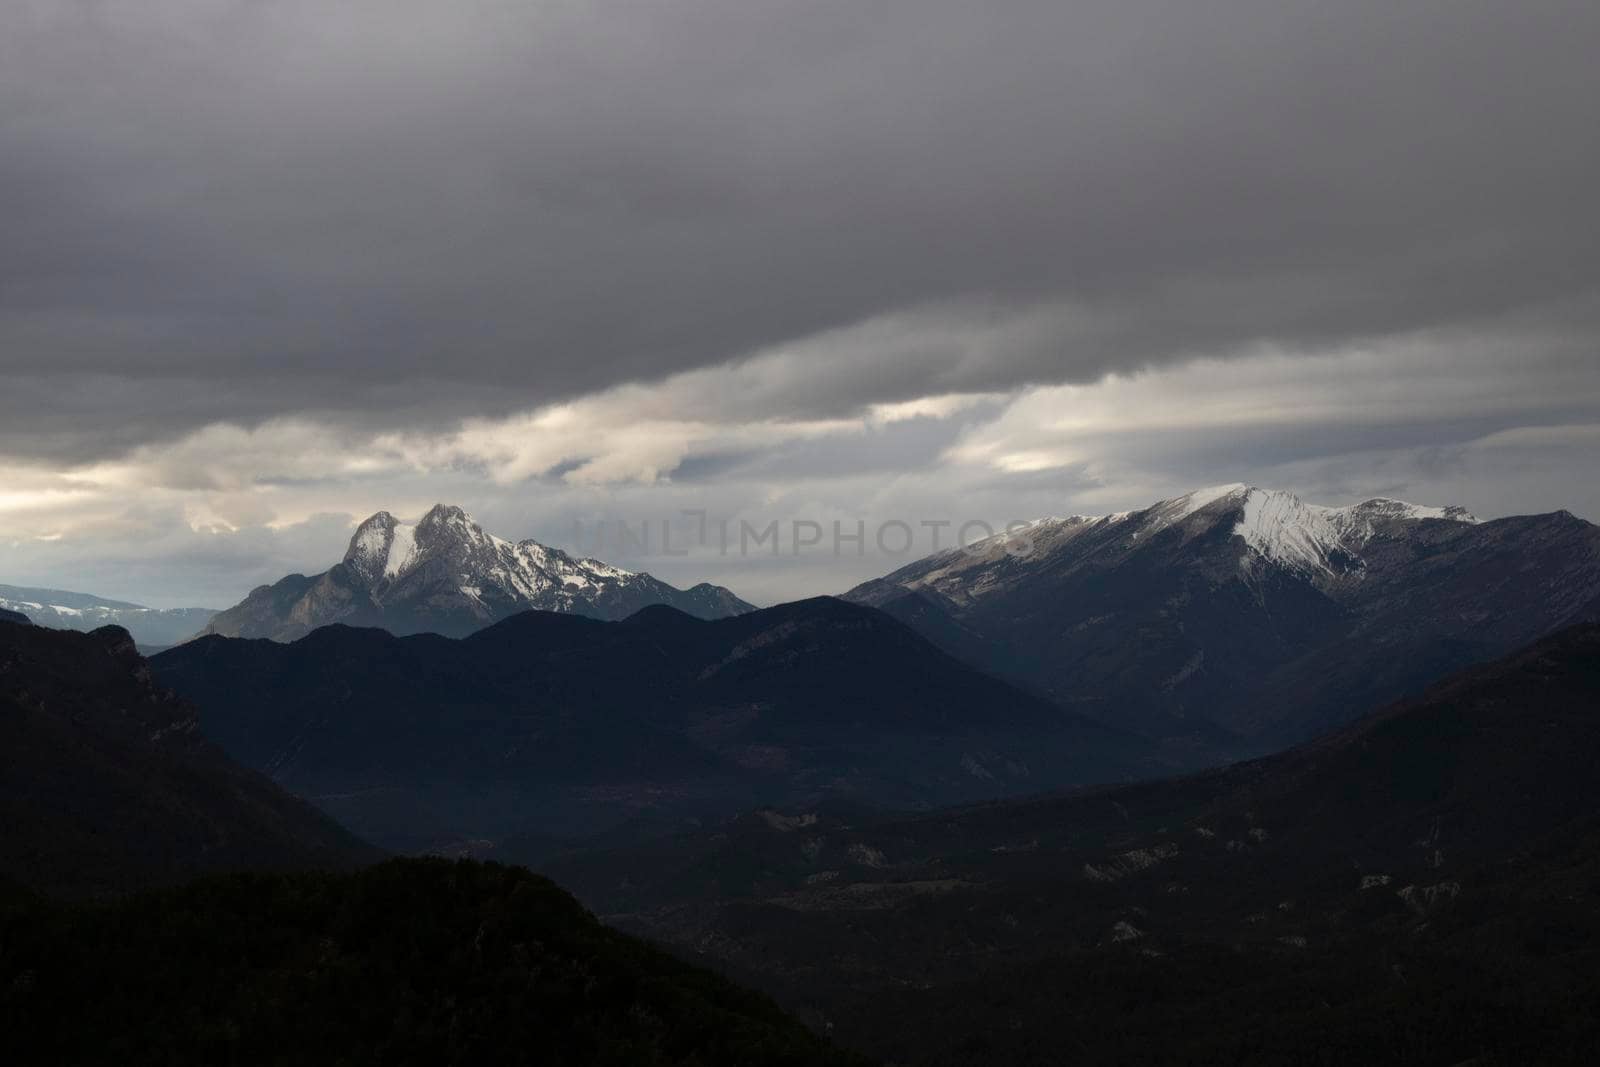 Landscape showing a couple of snowy mountains, one of them called Pedraforca, under a cloudy sky